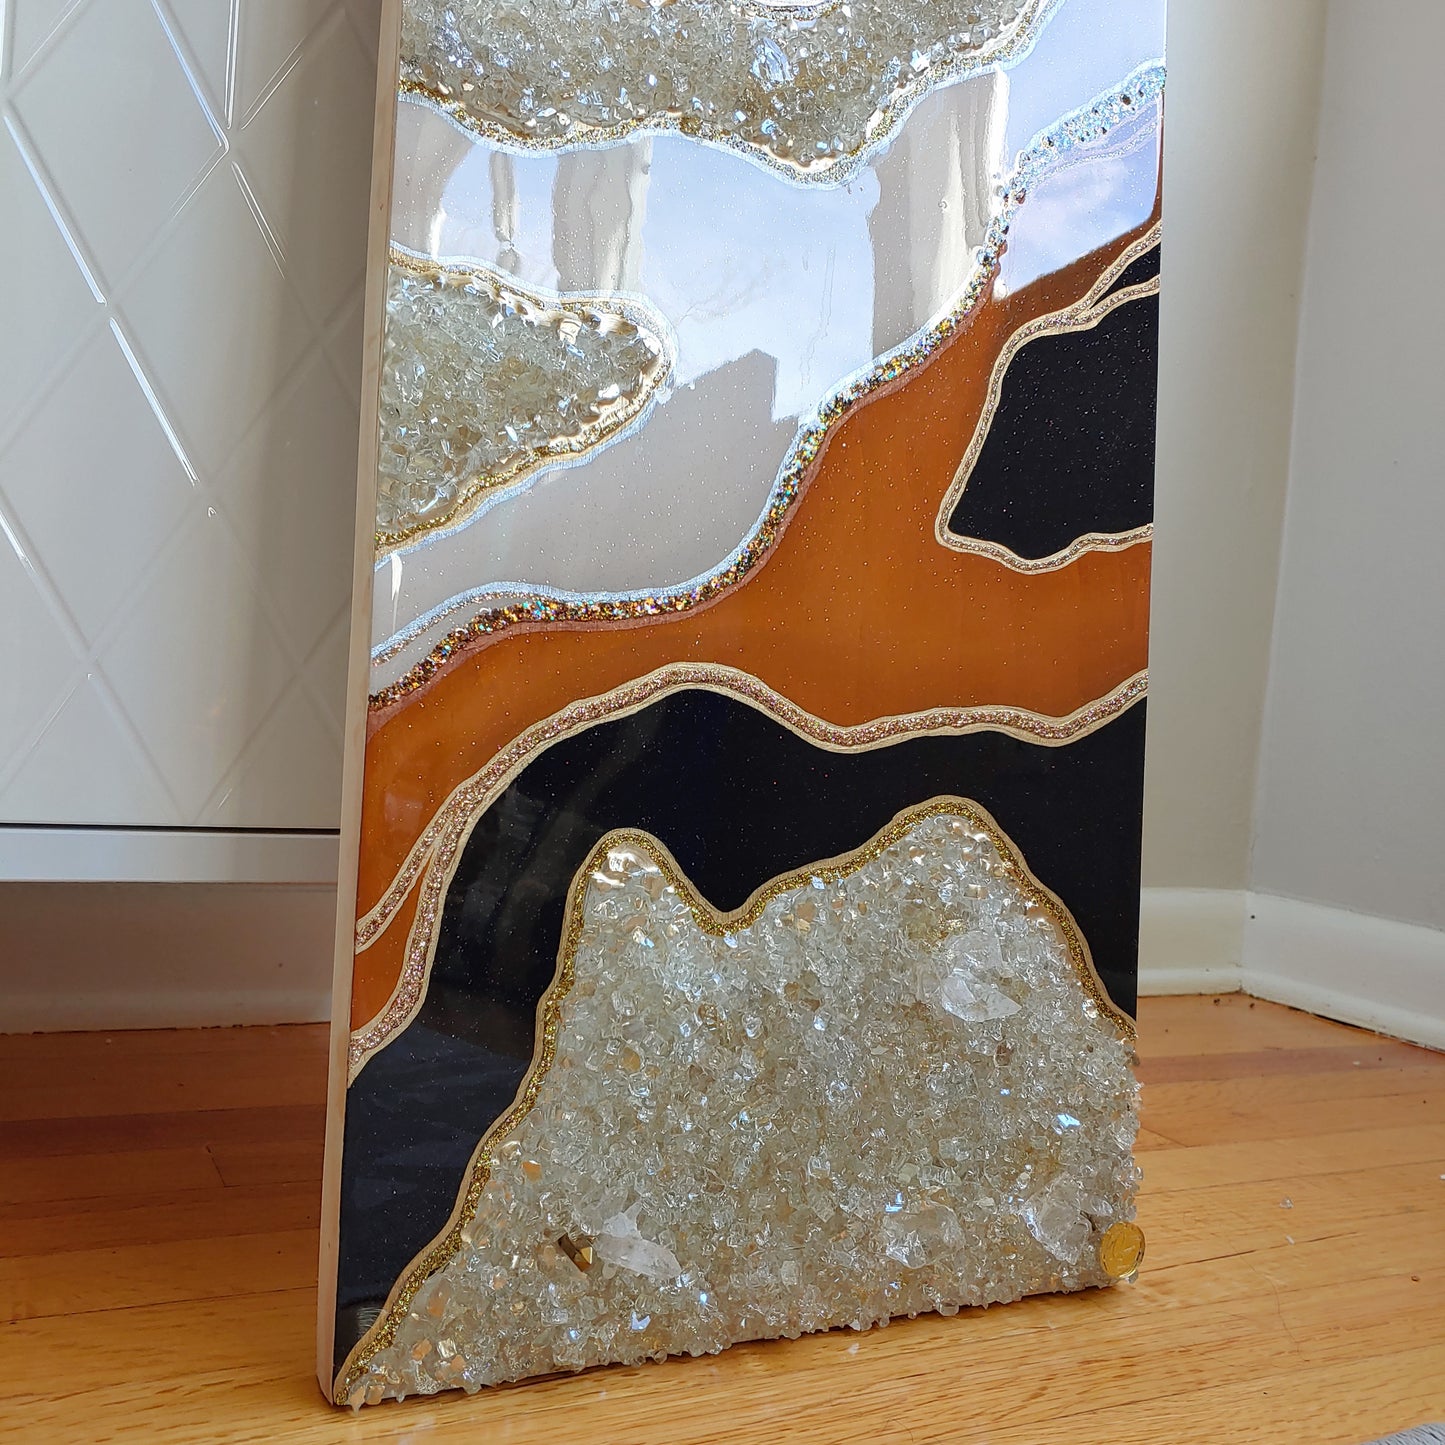 SALE! Caramel & Espresso Resin, Glass and crystal wall art panel